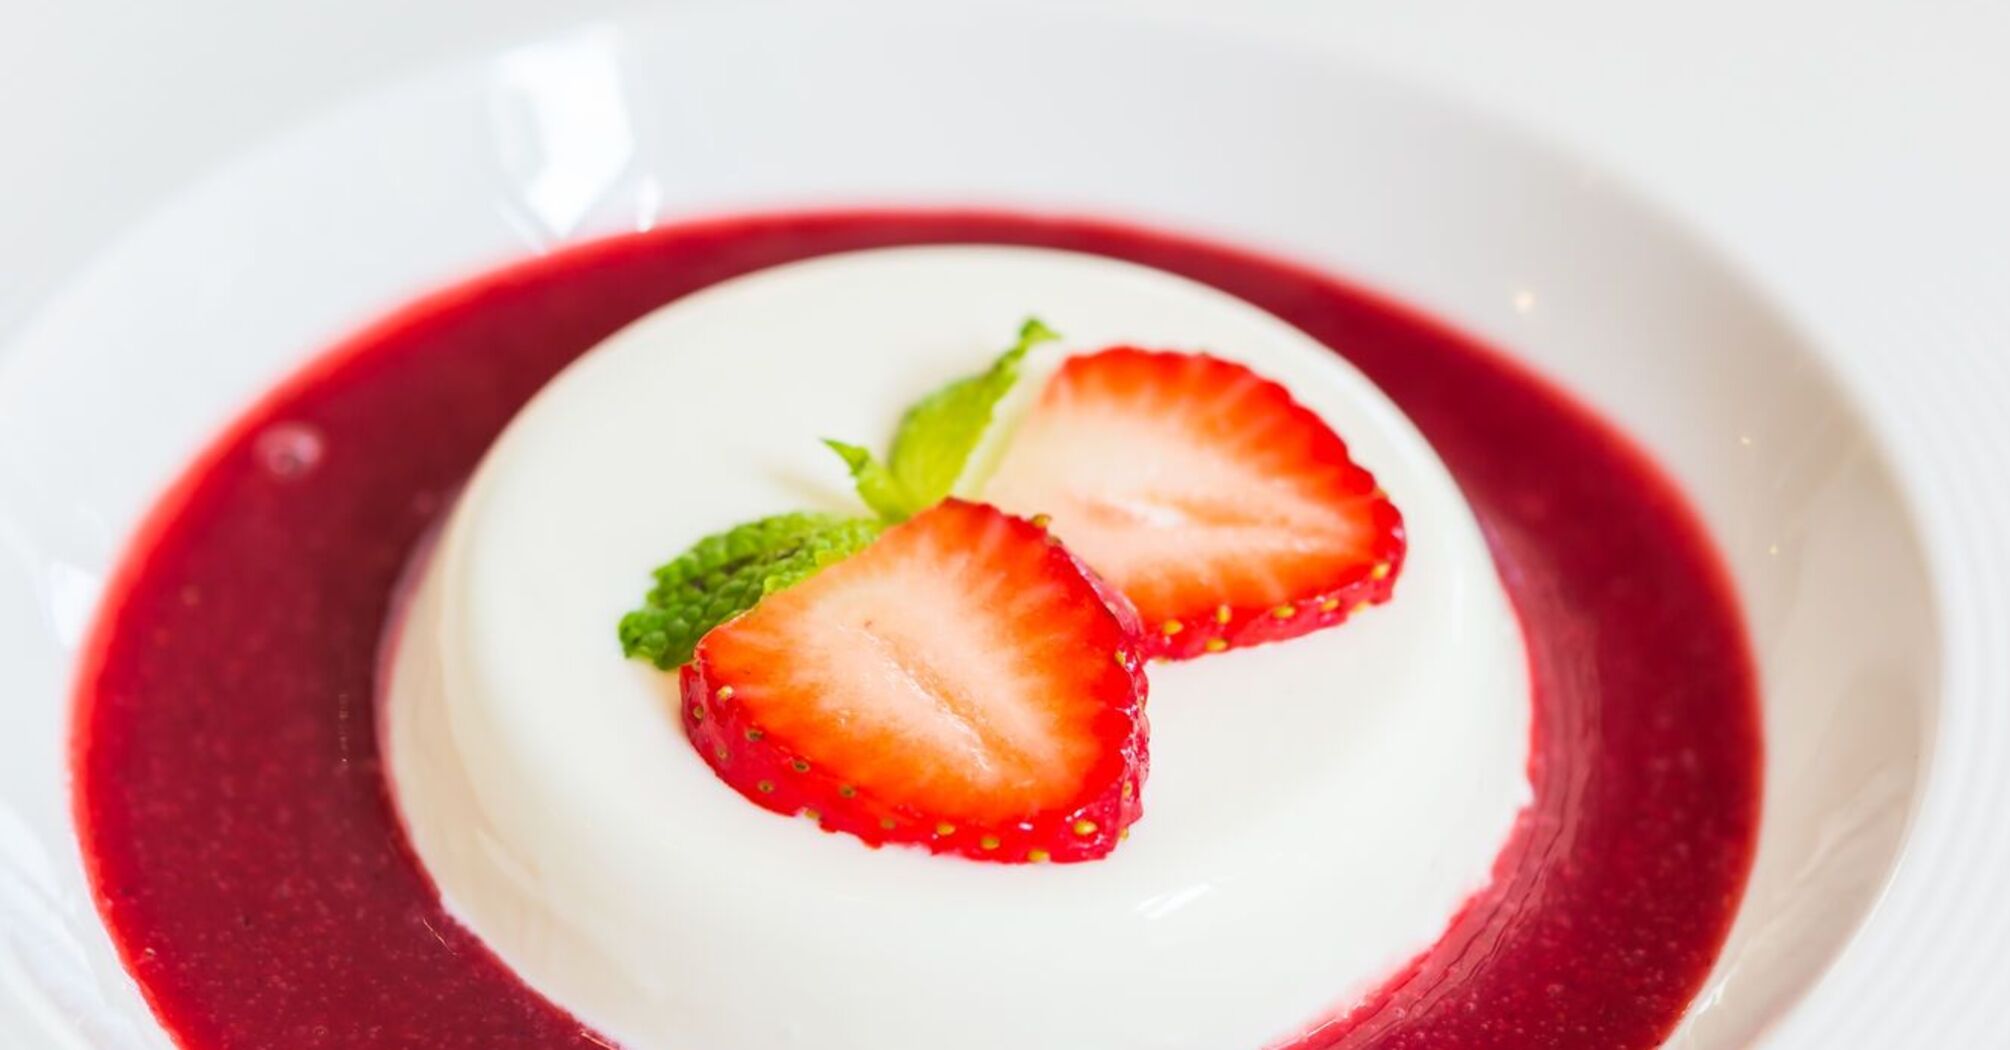 Strawberry panacotta: a simple dessert that everyone loves